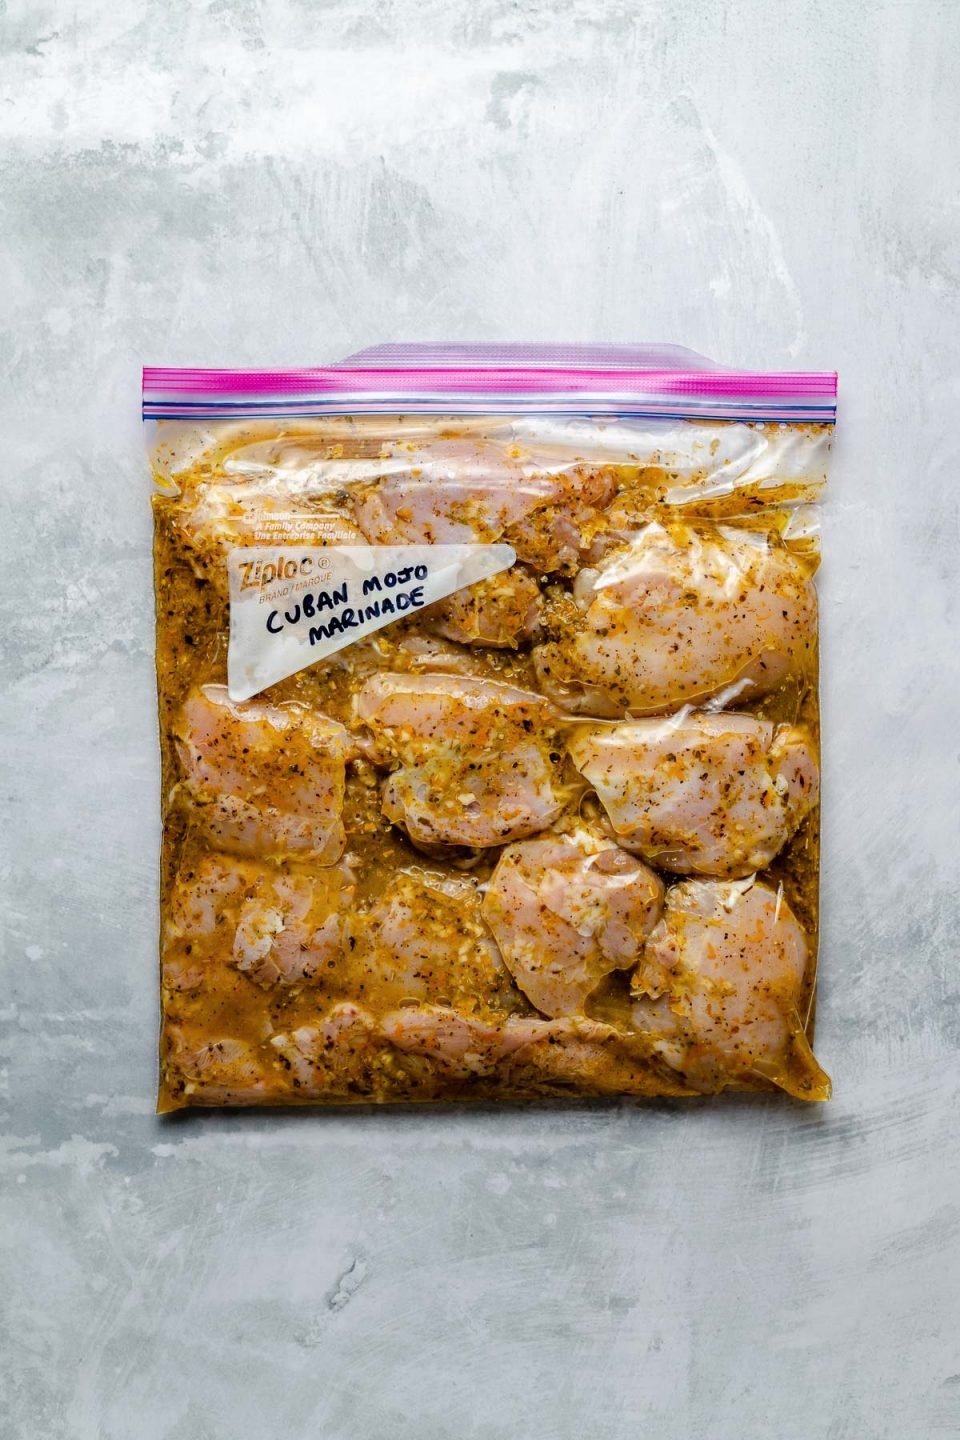 Chicken thighs in mojo marinade in a Ziploc bag atop a light blue surface. "Cuban Mojo Marinade" is written in the bag's memo space.